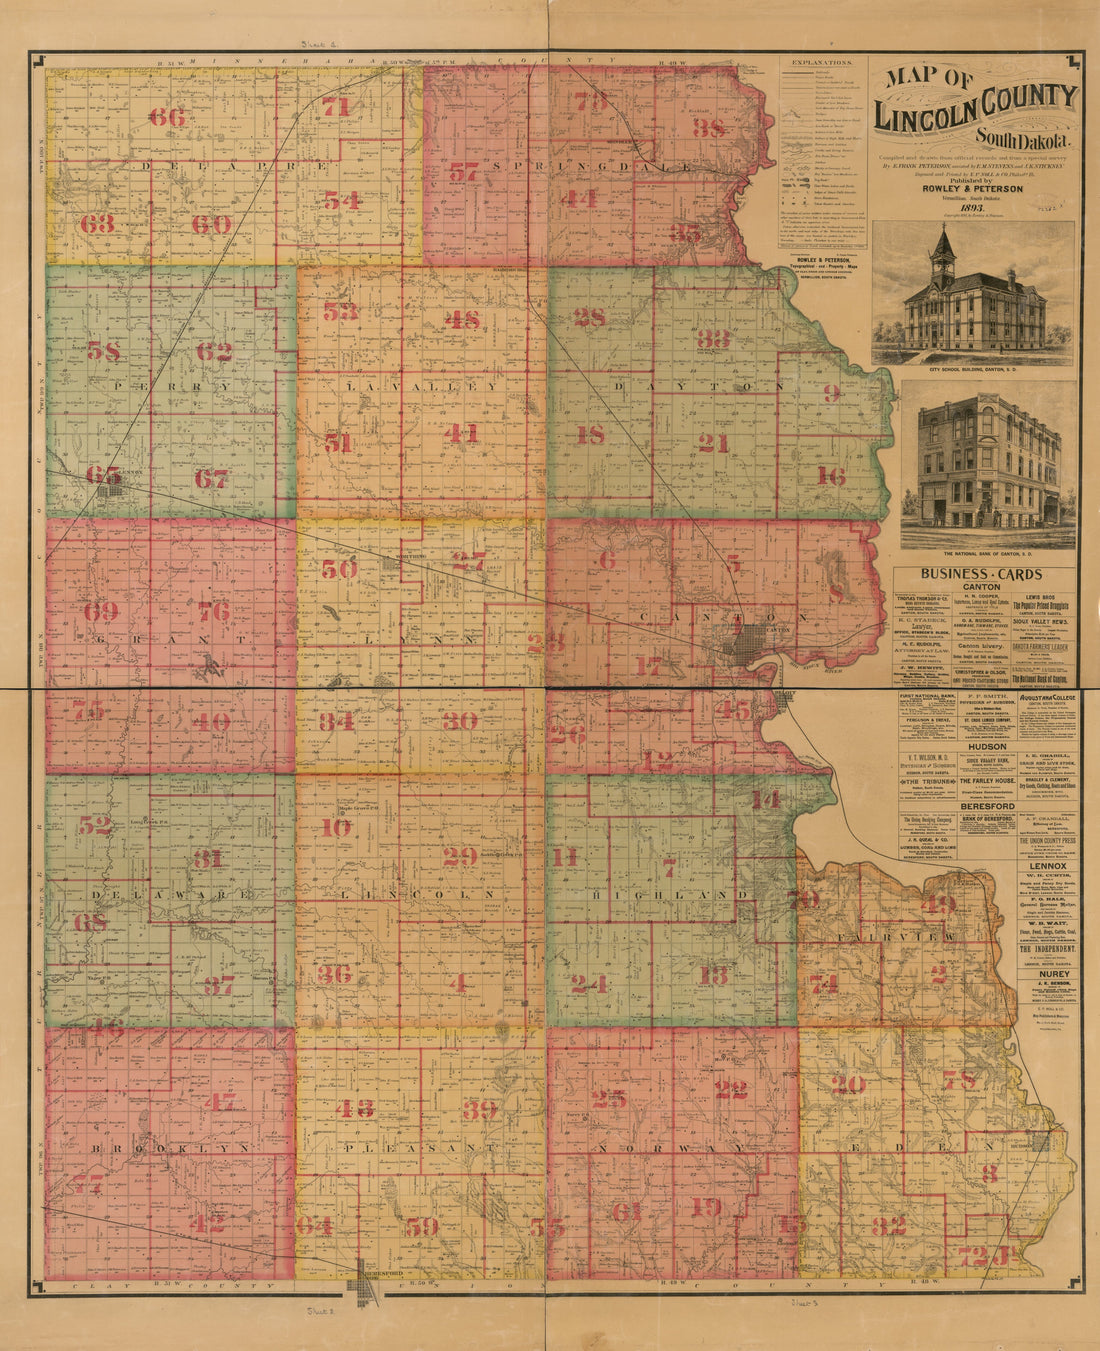 This old map of Map of Lincoln County, South Dakota : Compiled and Drawn from Official Records and a Special Survey from 1893, 1902 was created by  E.P. Noll &amp; Co, E. Frank Peterson,  Rowley &amp; Peterson in 1893, 1902